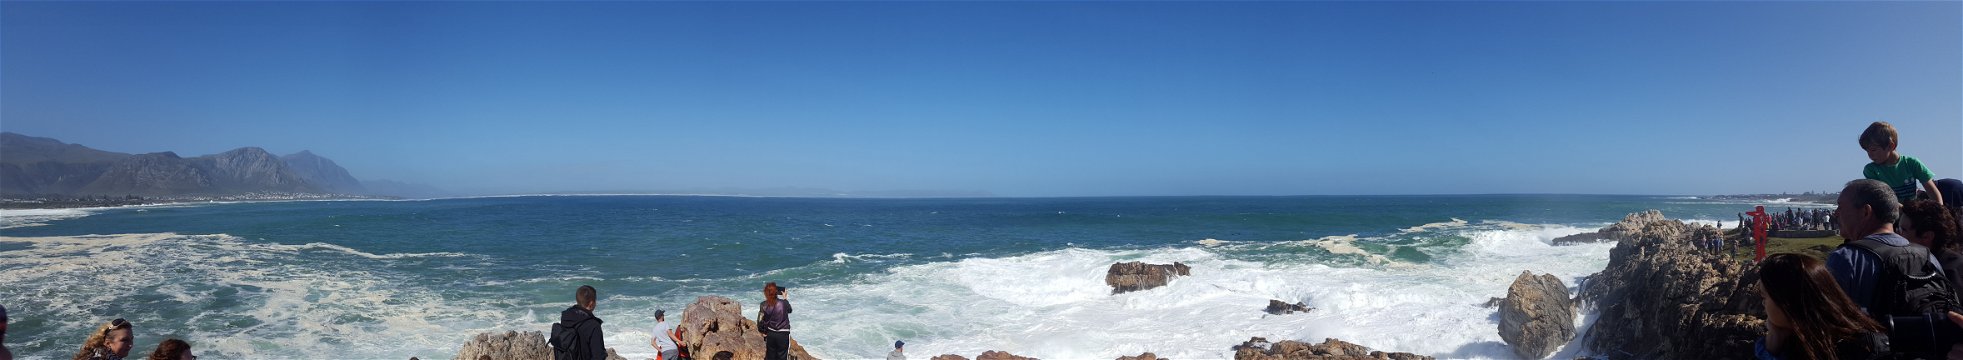 The viewpoint from the Hermanus promenade